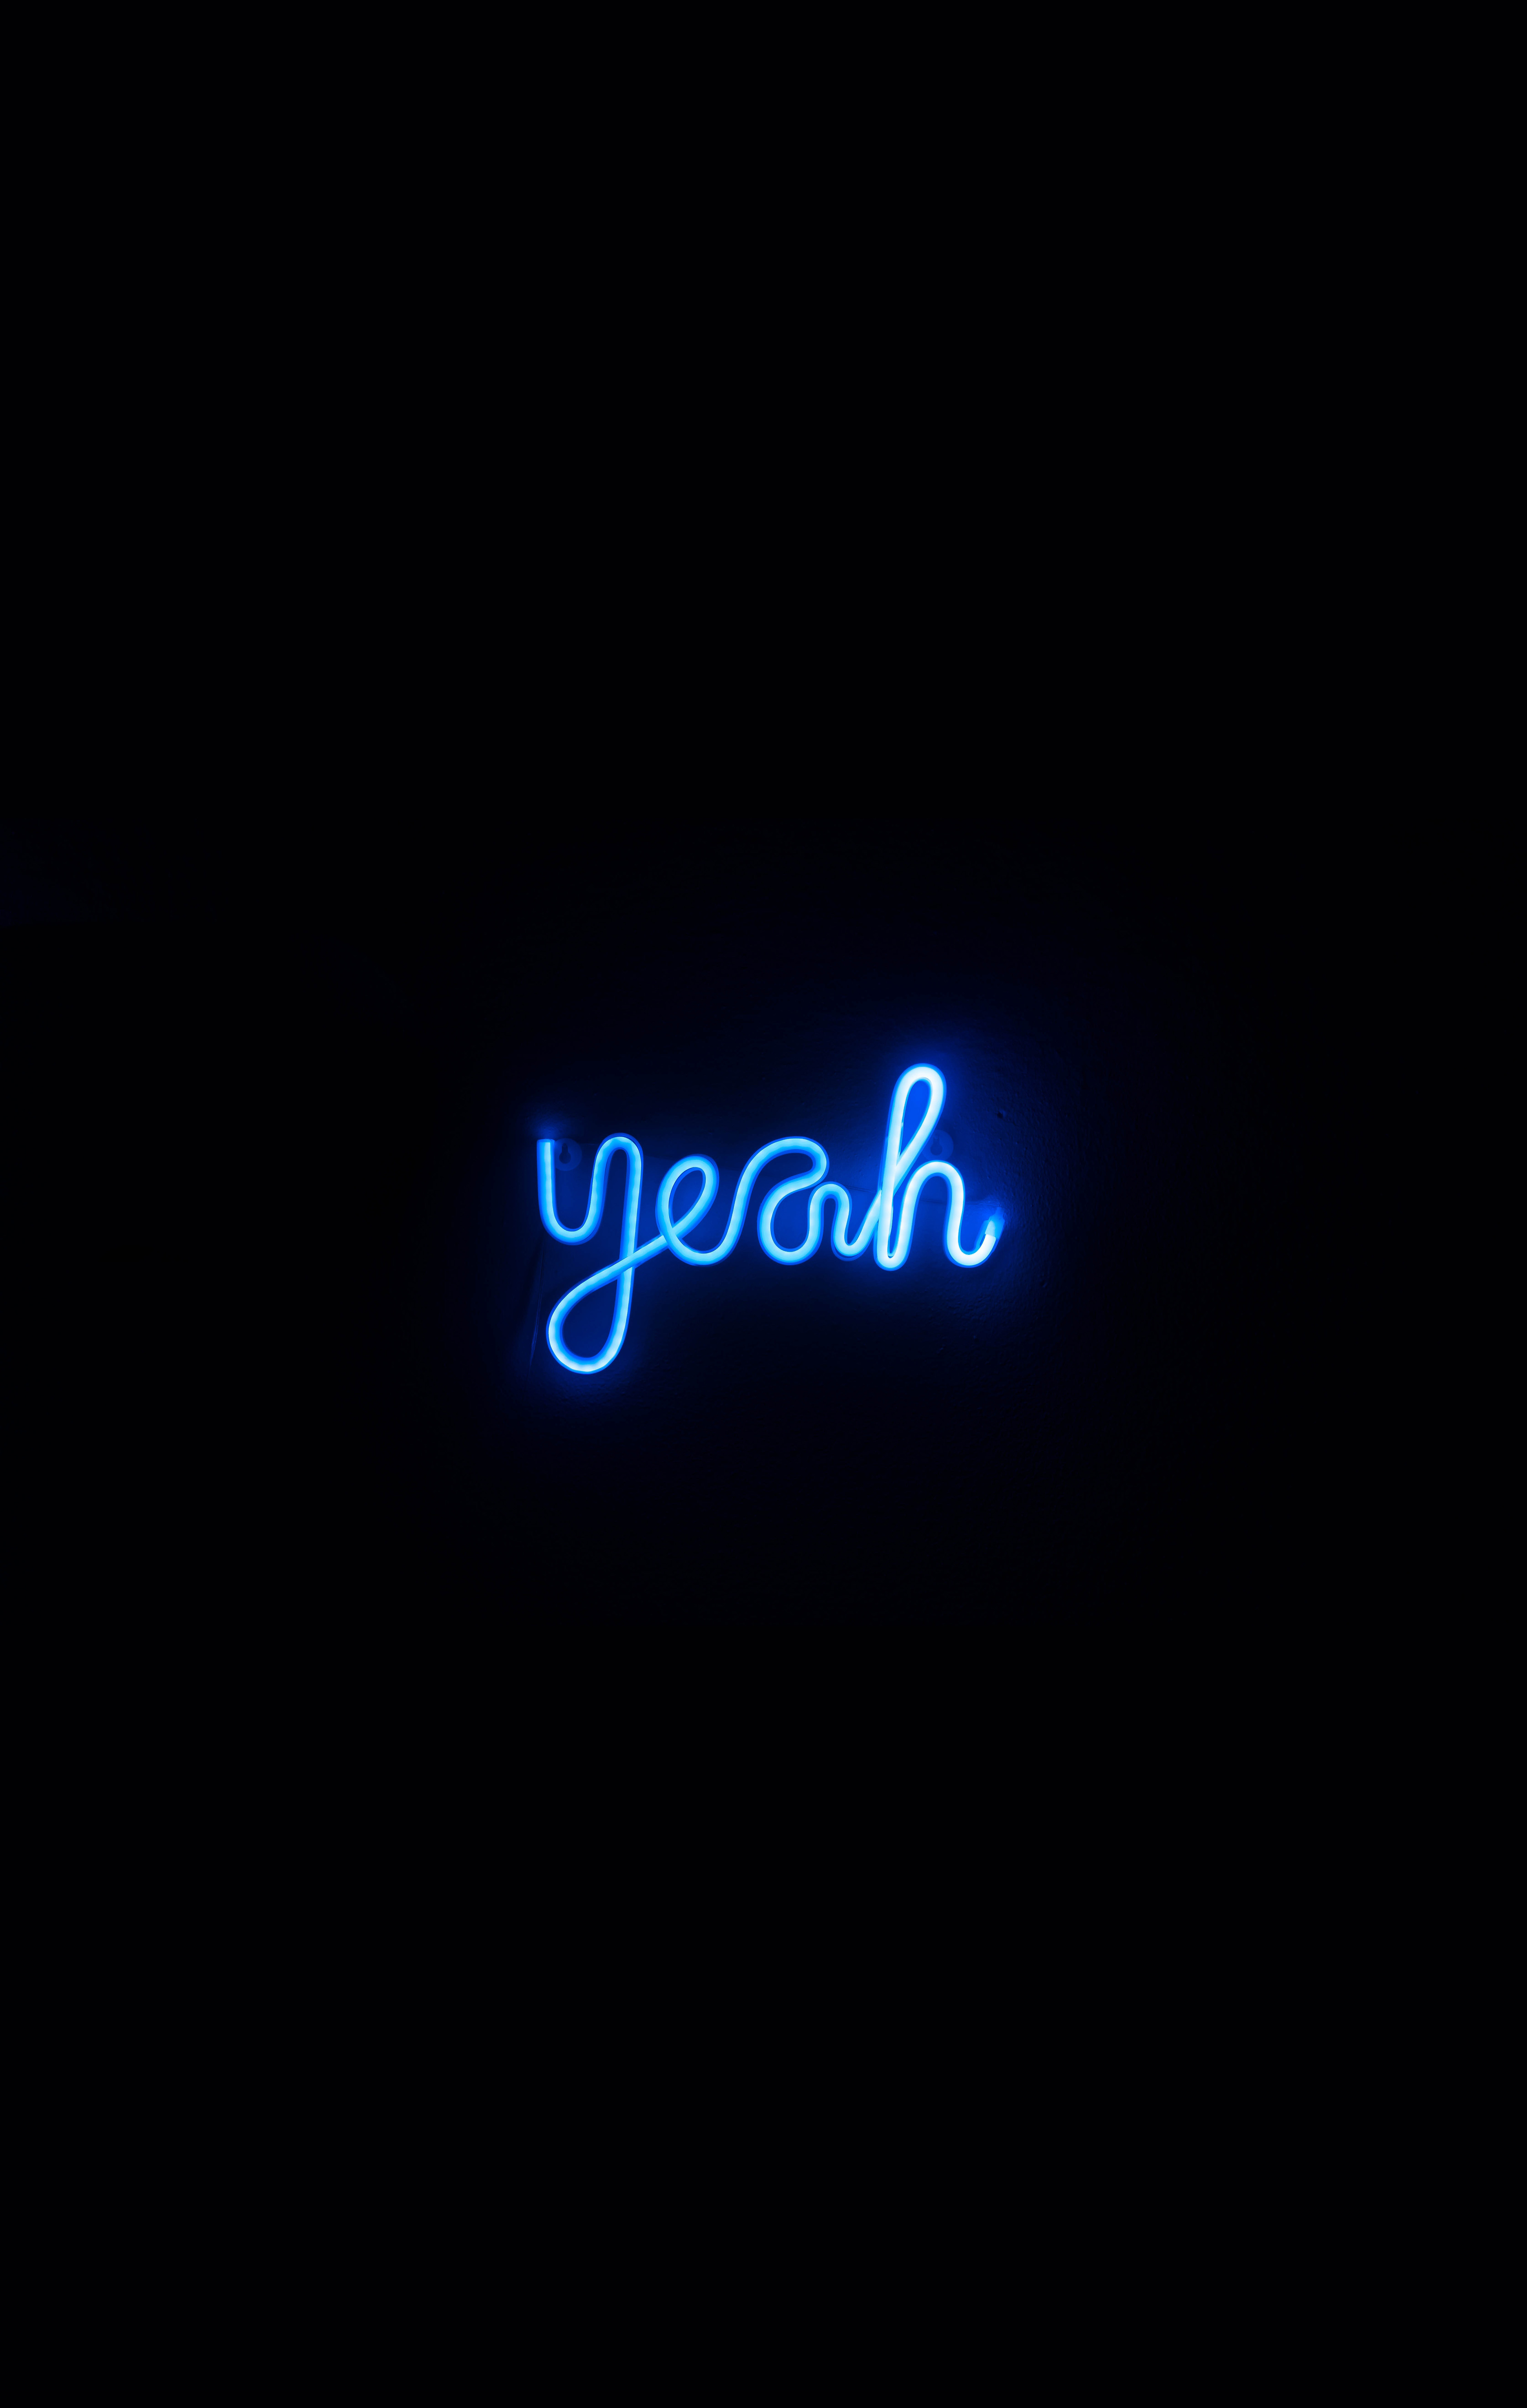 neon, word, glow, words, blue, text High Definition image